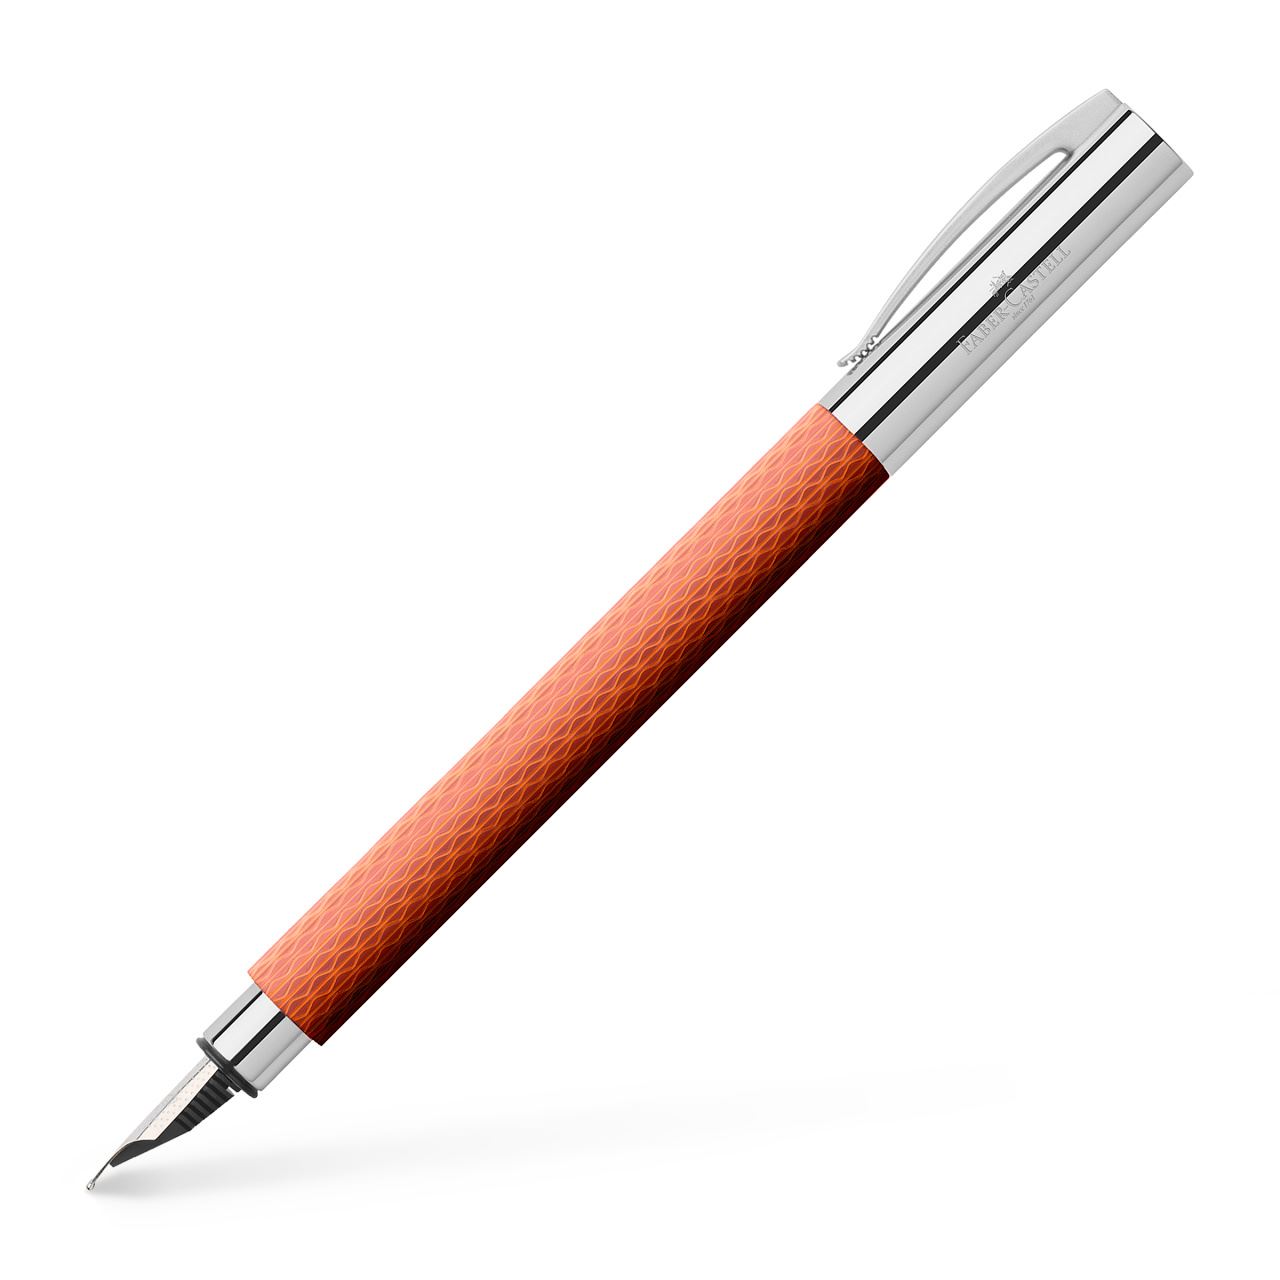 Faber-Castell - Fountain pen Ambition OpArt Autumn Leaves, F